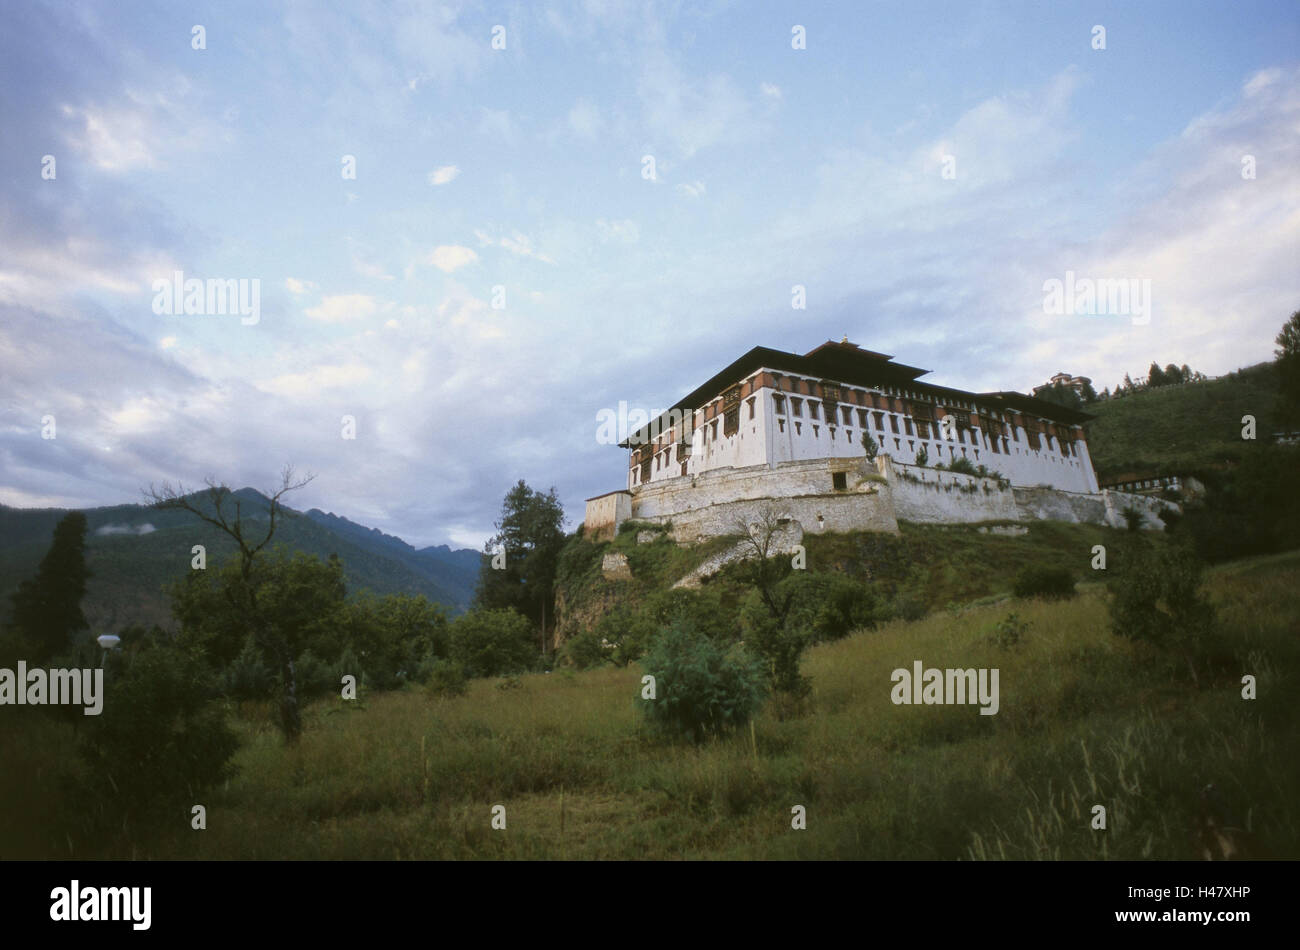 Bhutan, Paro, cloister fortress Dzong, scenery, dusk, Asia, the Himalayas, kingdom, Westbhutan, cloister, cloister plant, cloister castle, fortress, structure, building, historically, architecture, culture, religion, faith, Buddhism, place of interest, mountains, wood, nobody, outside, cloudy sky, Stock Photo